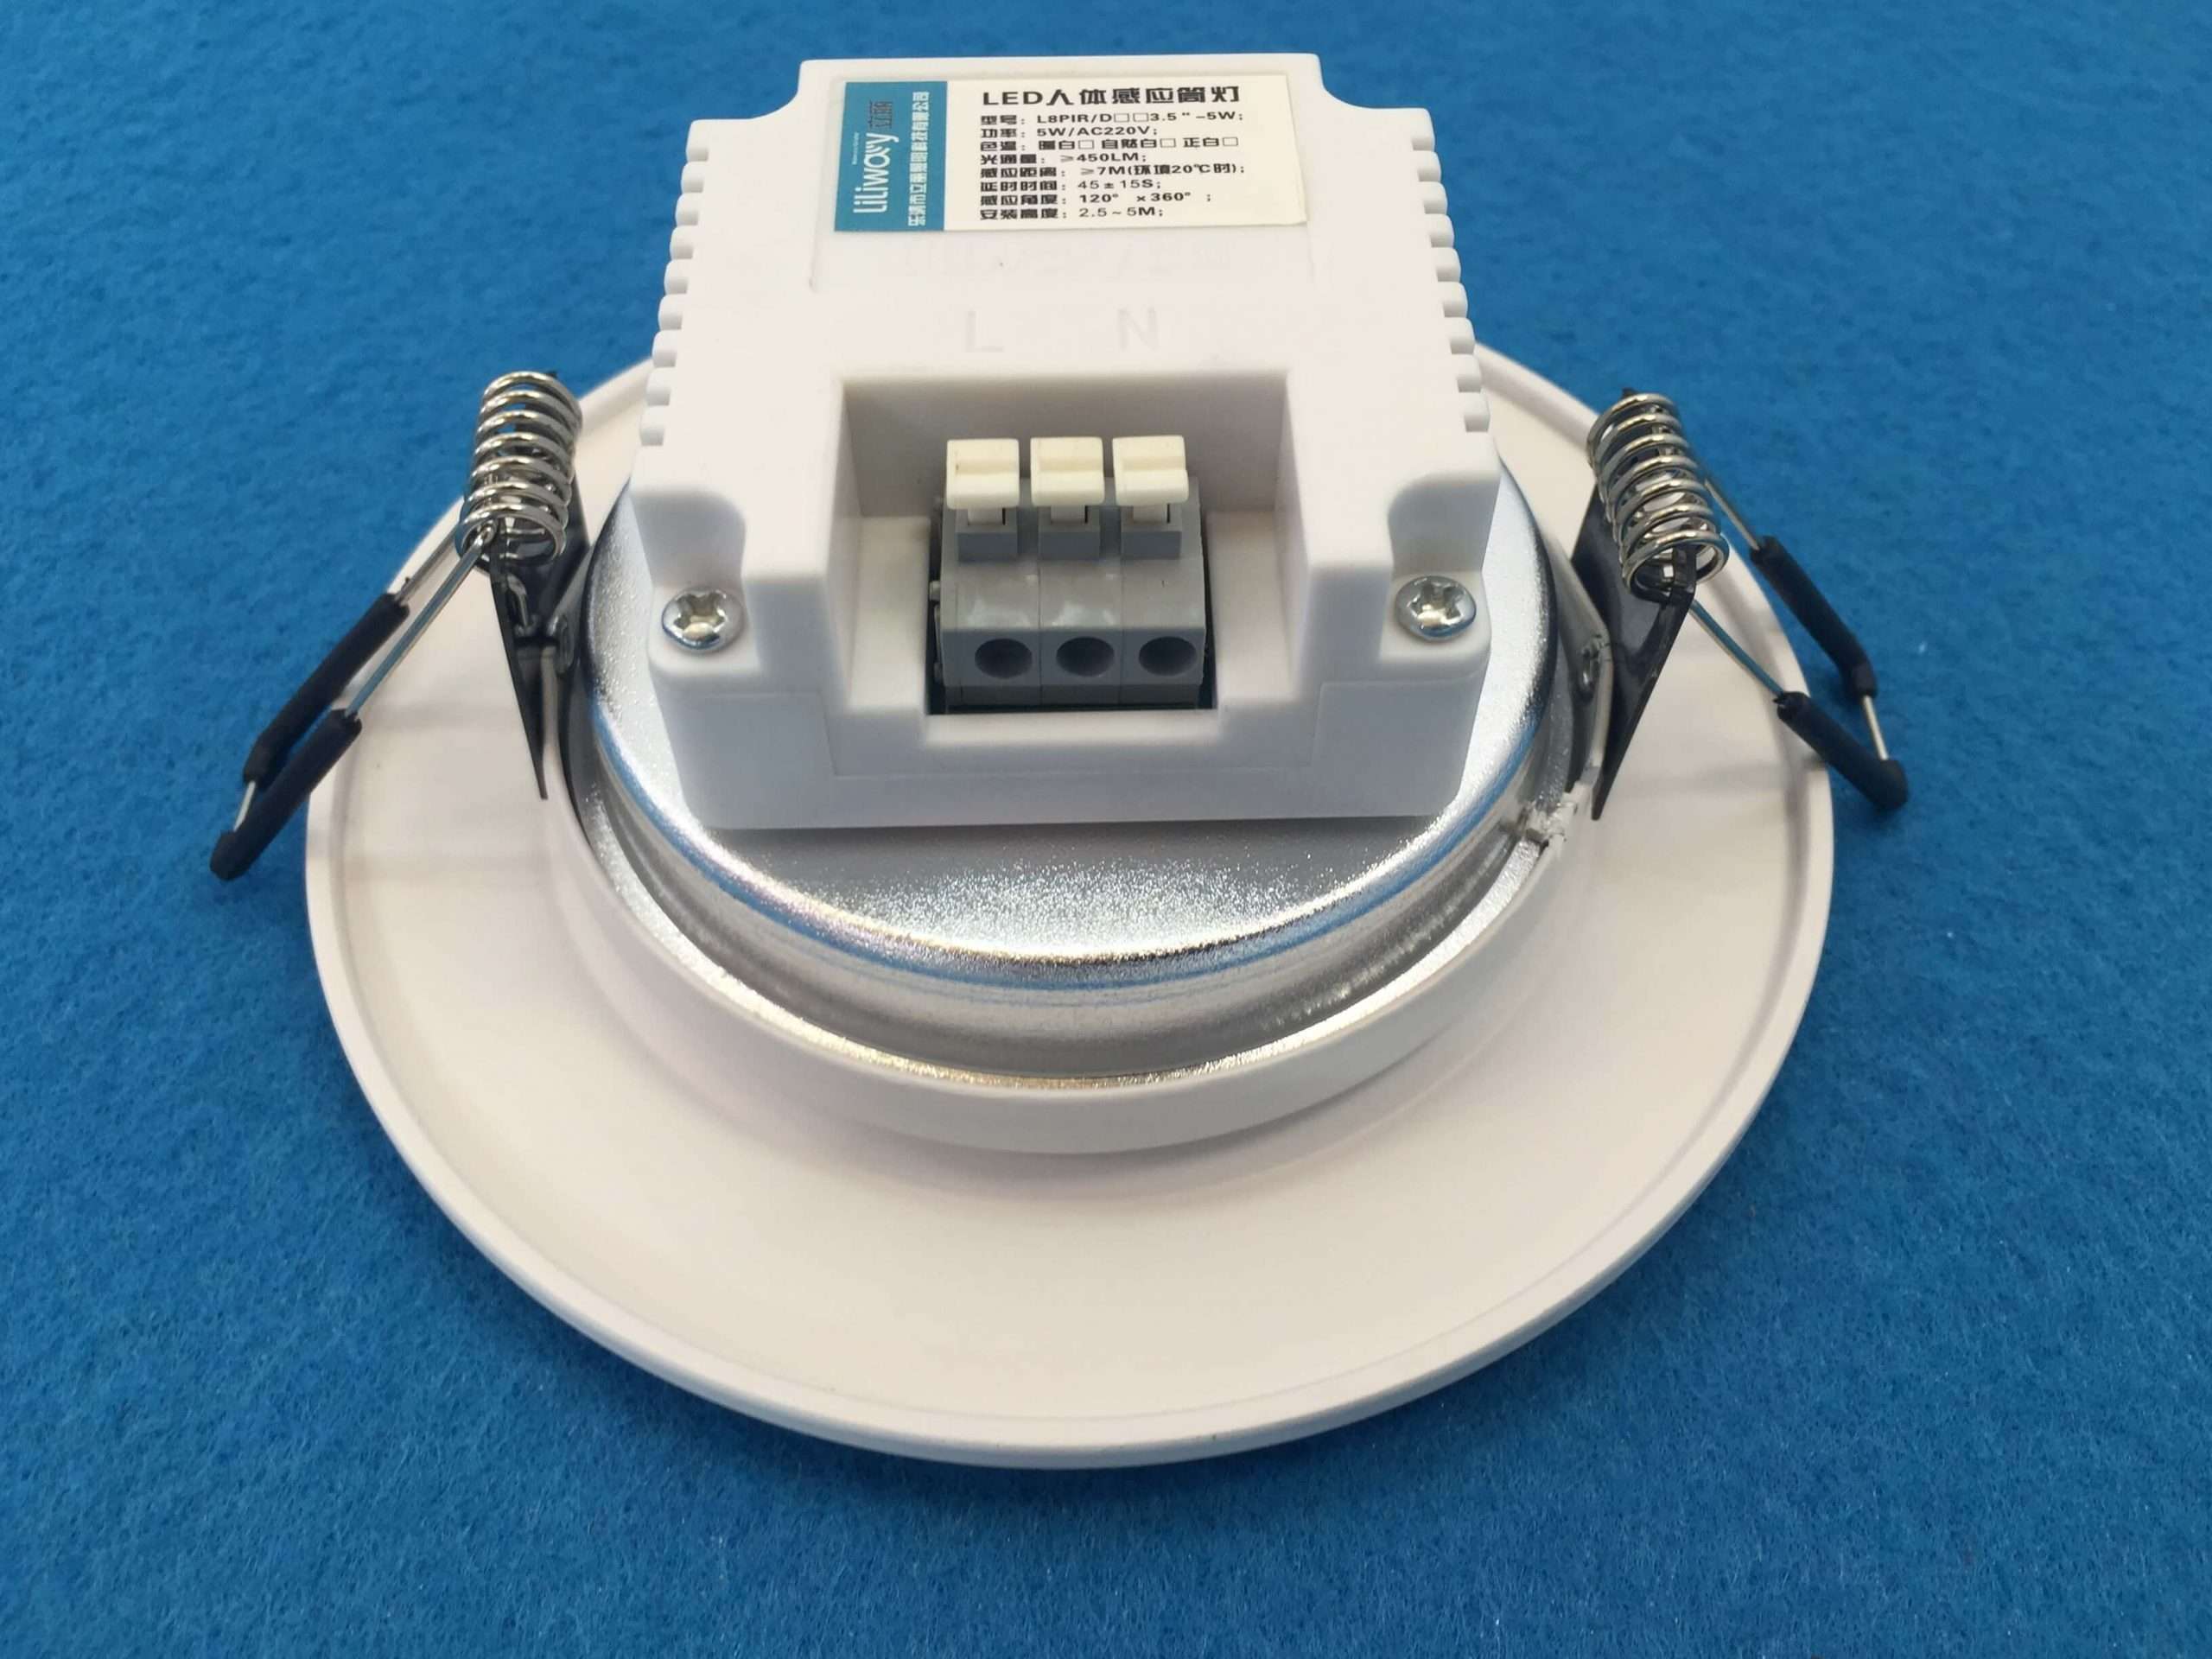 downlight with built in pir